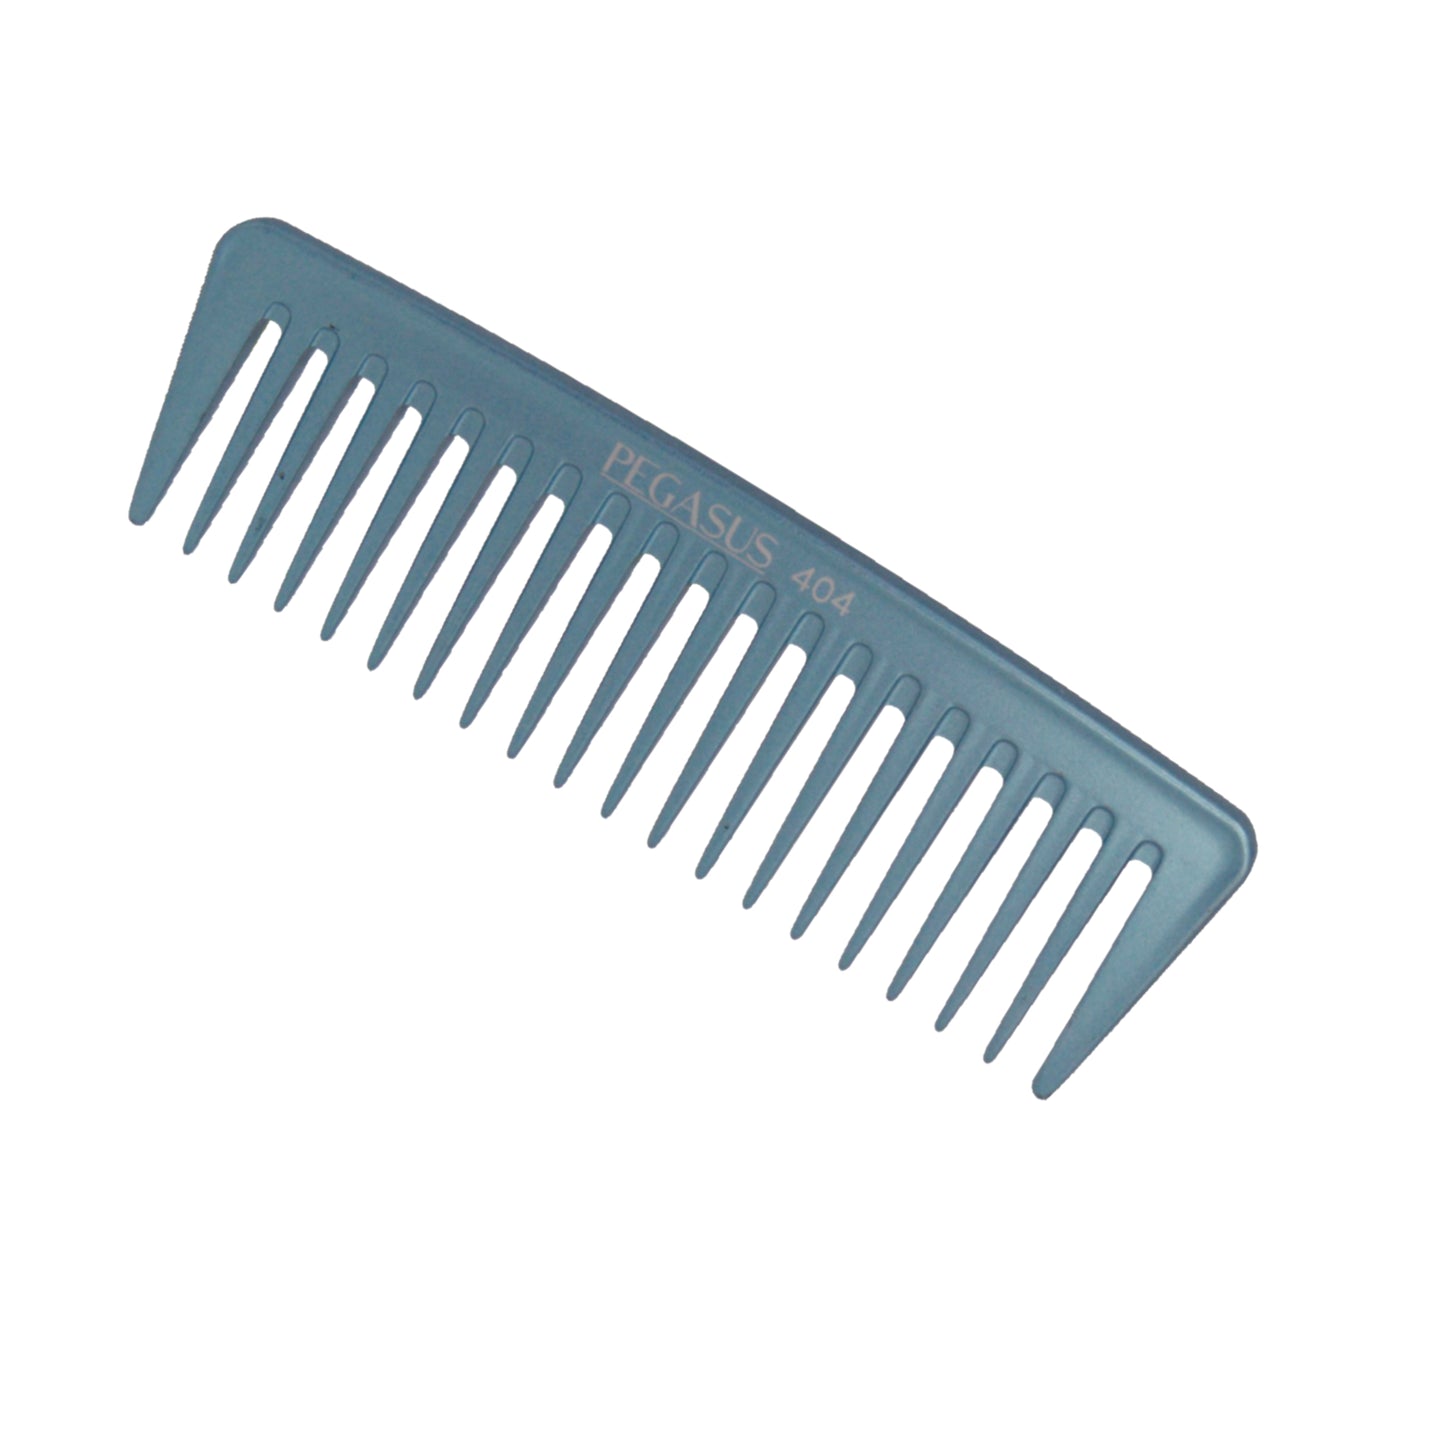 Pegasus MICOLOR 404, 7in Hard Rubber Wide Tooth Tall Styling Comb, Handmade, Seamless, Smooth Edges, Anti Static, Heat and Chemically Resistant, Wet Hair, Everyday Grooming Comb | Peines de goma dura - Blue